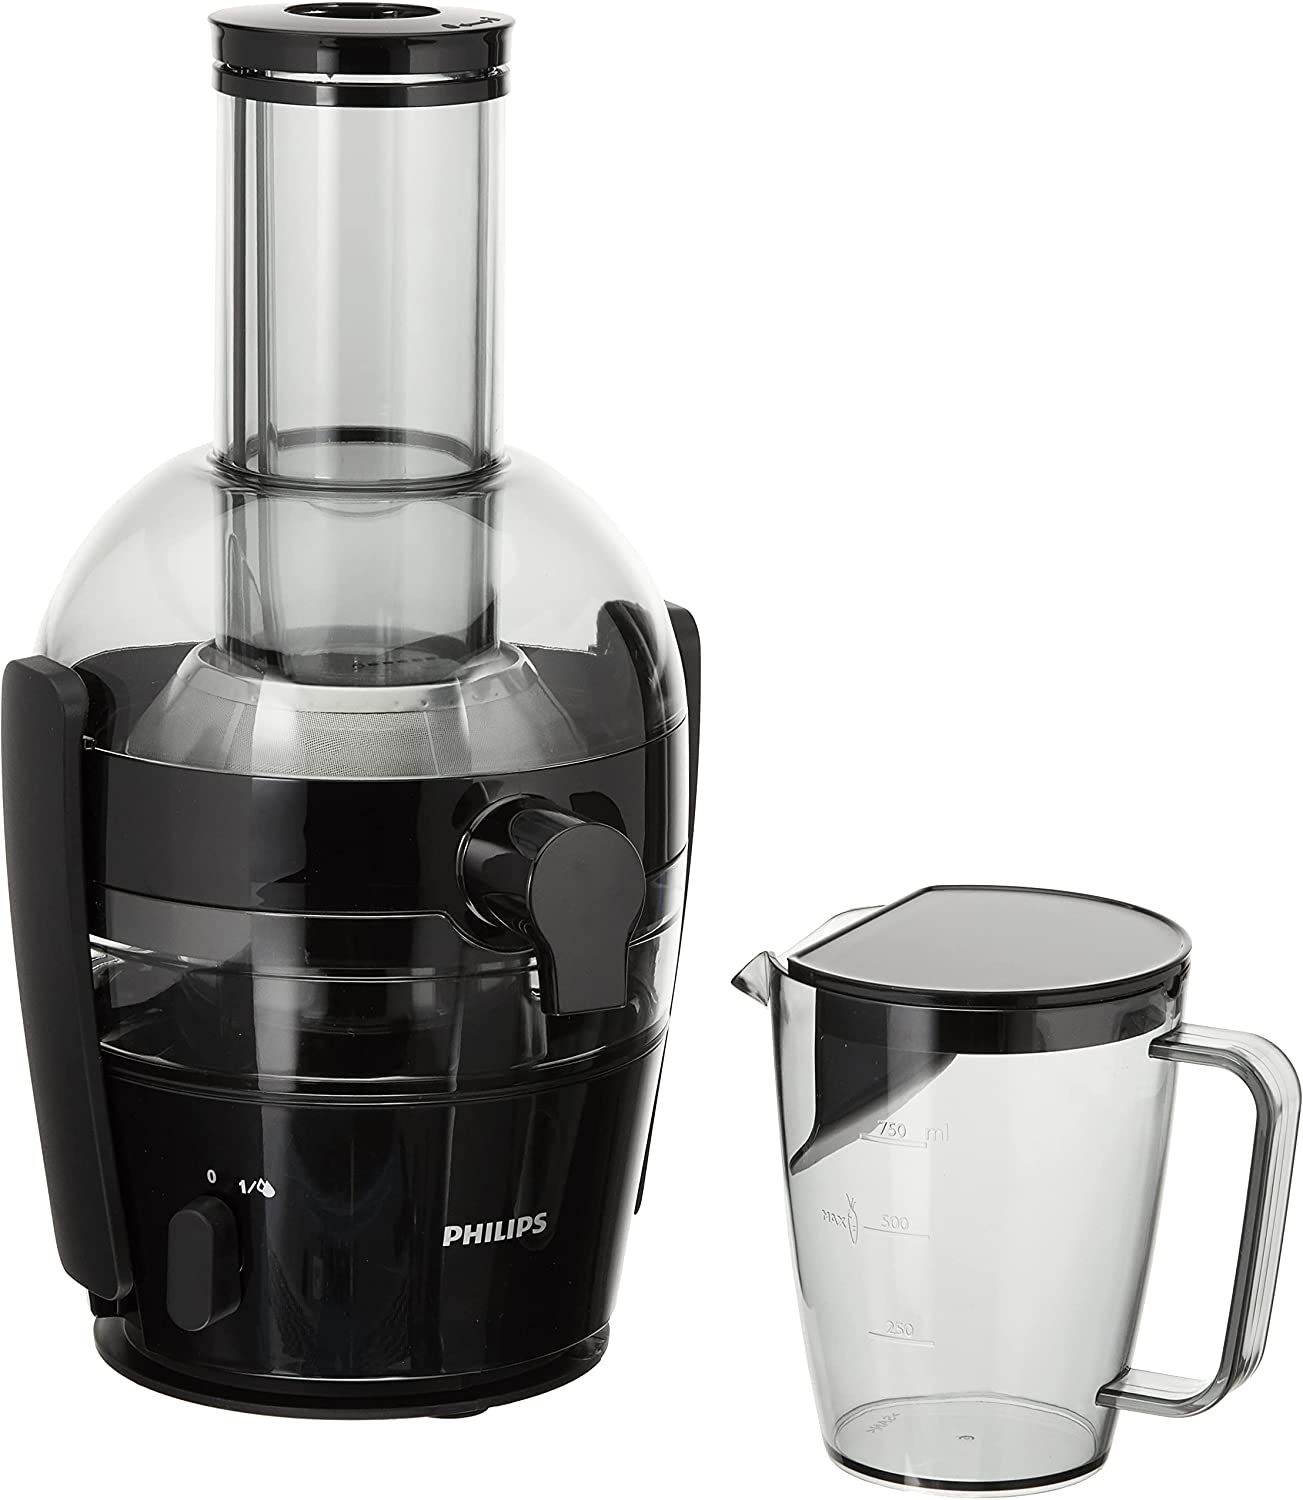 Philips Domestic Appliances Philips HR1856/70 Juicer (800 W, 2 Litre Capacity, QuickClean Technology, including juice container)